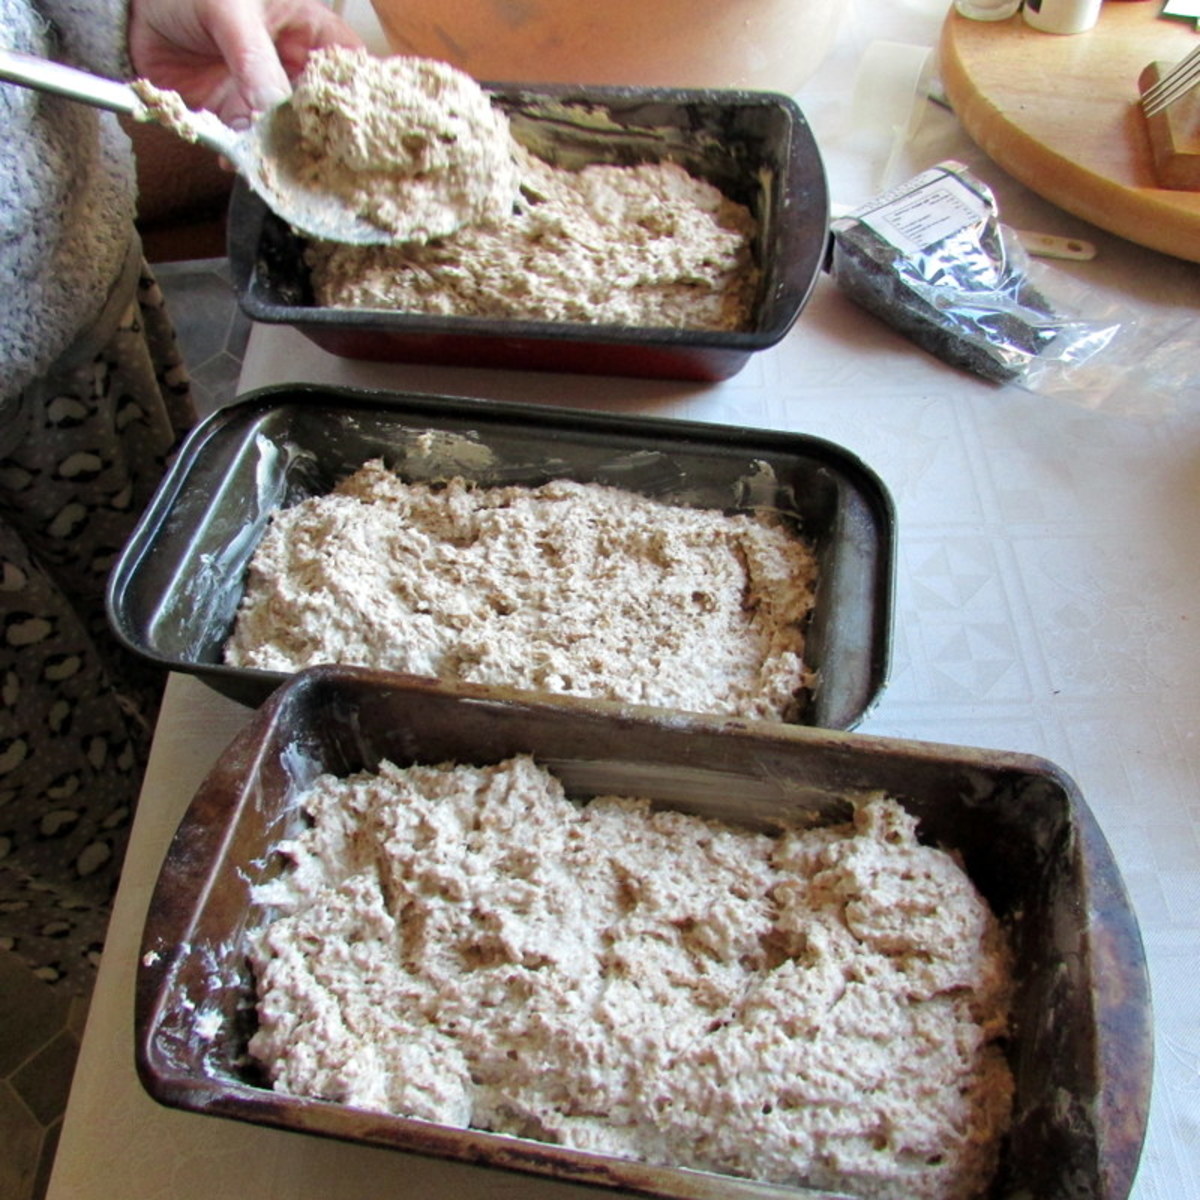 Using a large spoon, fill the tins with the bread mixture up to three-quarters full.